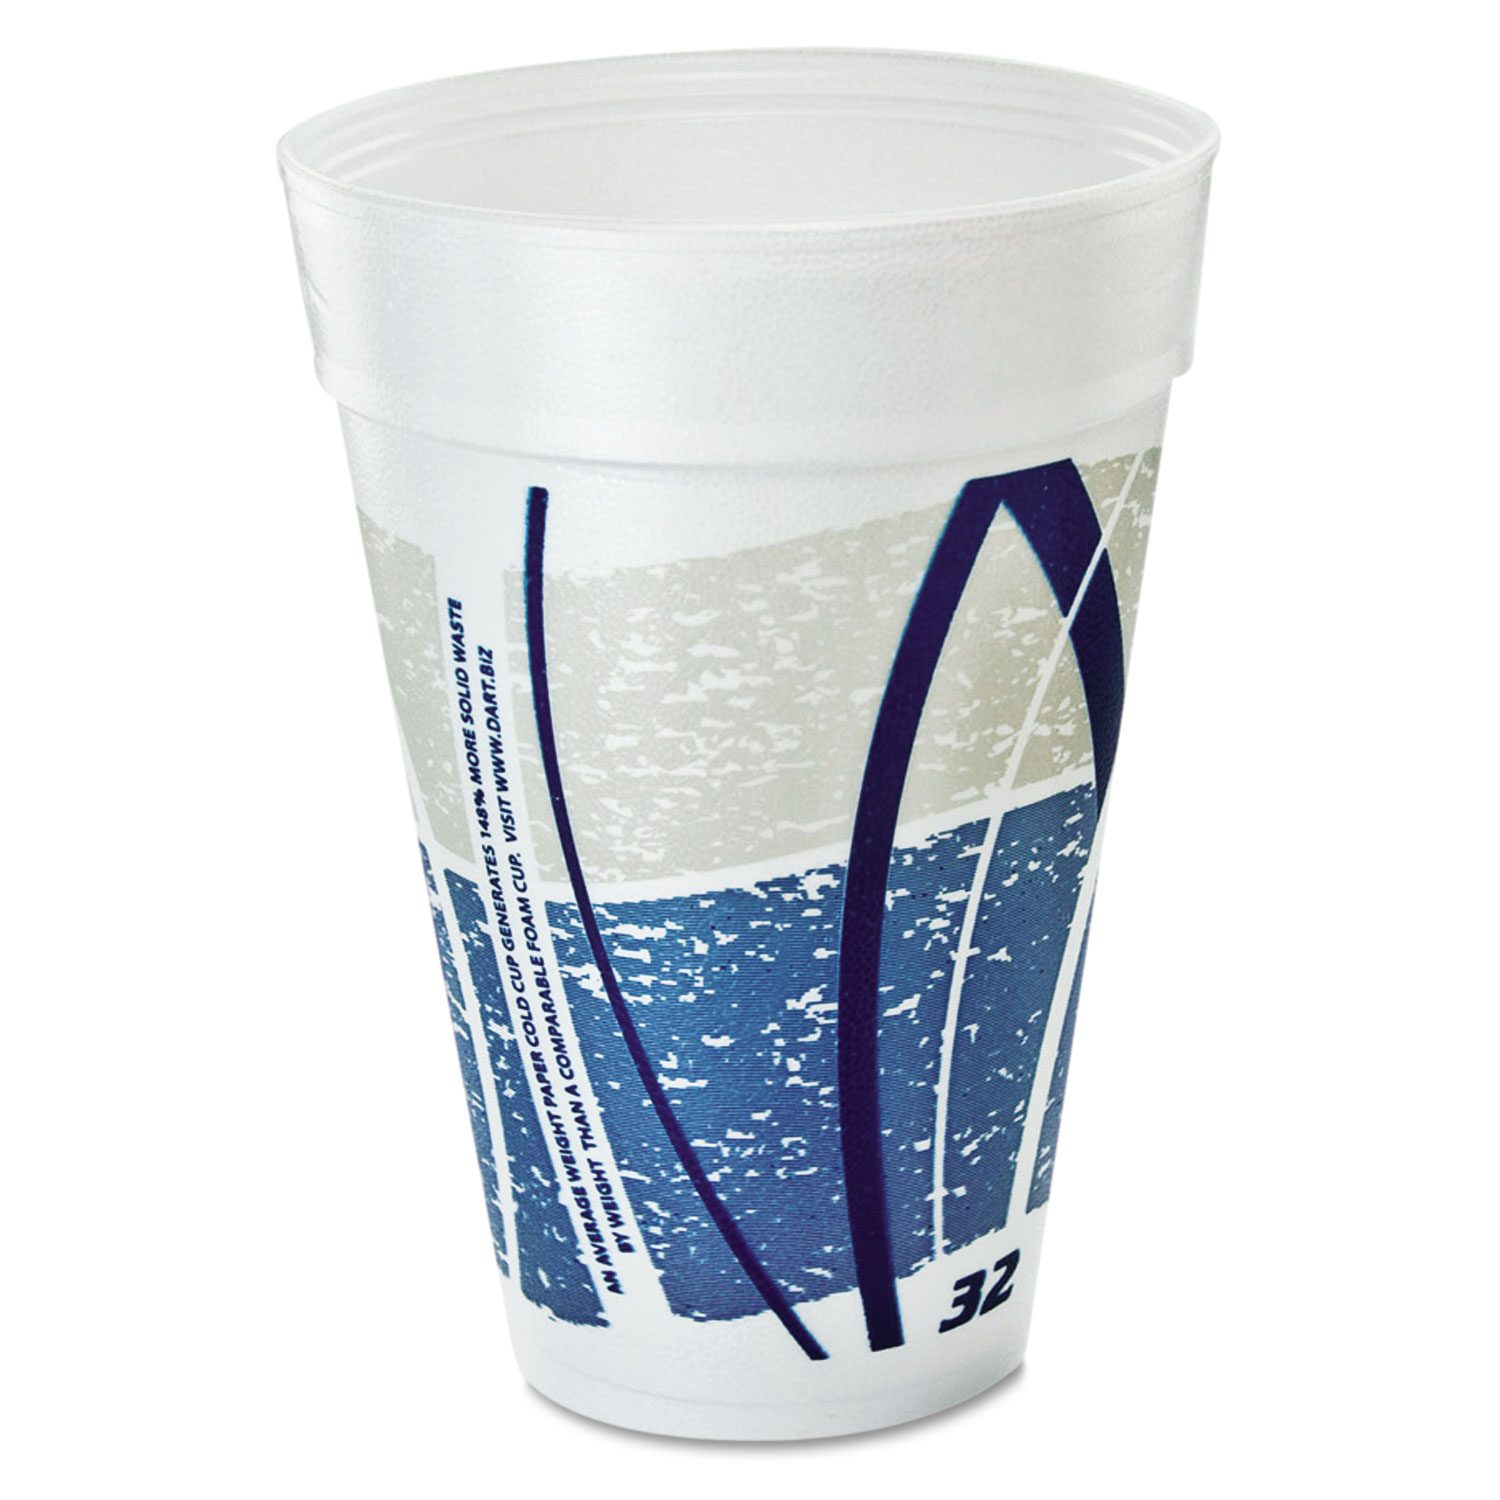 Impulse Hot/Cold Foam Drinking Cups, 32oz., Printed, Blue/Gray, 25/Bag, 20/CT